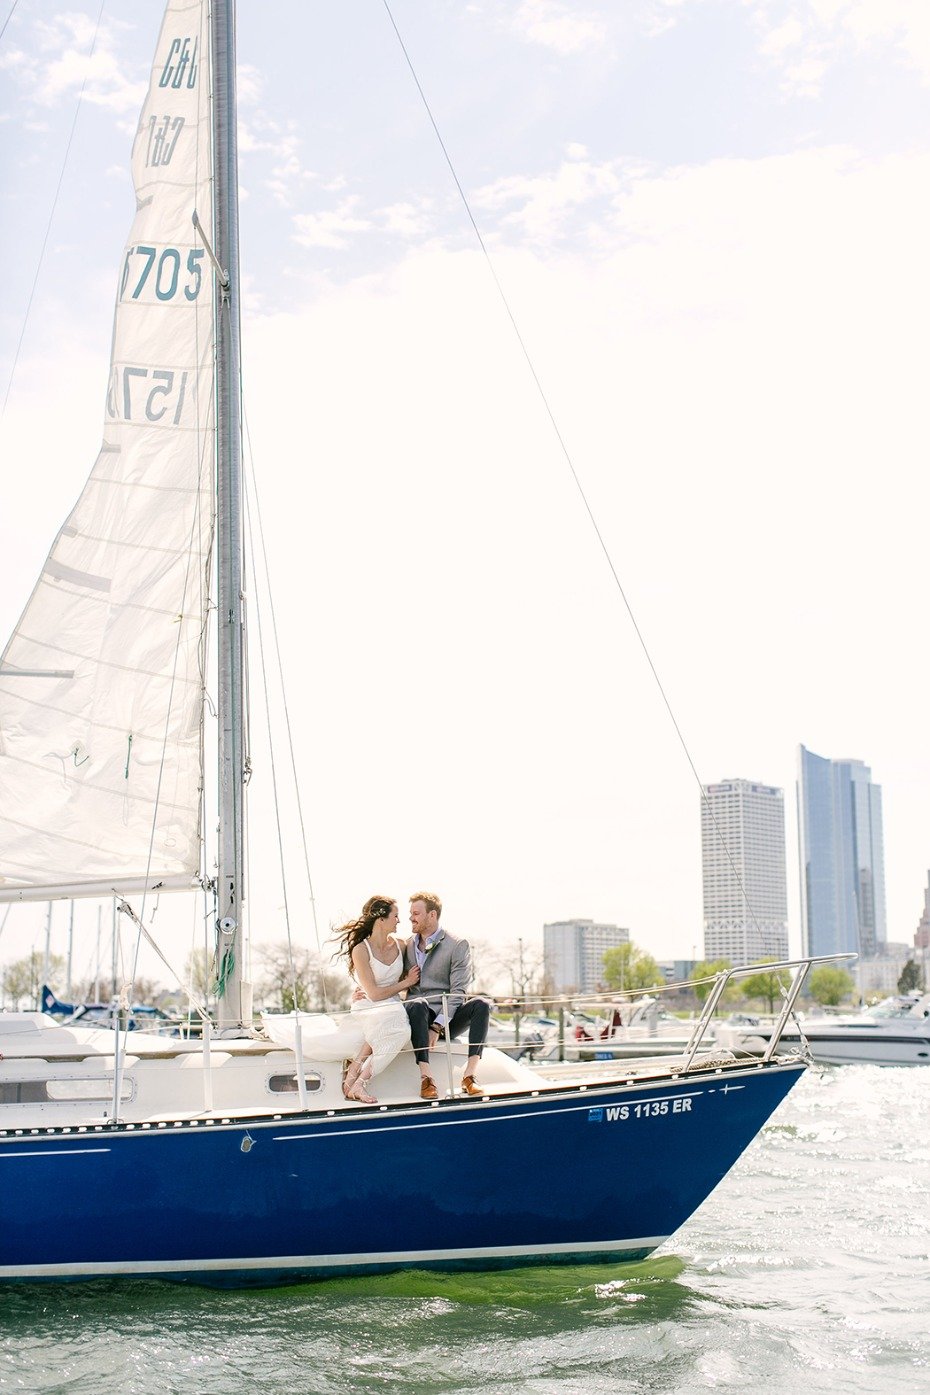 sail away on your wedding day